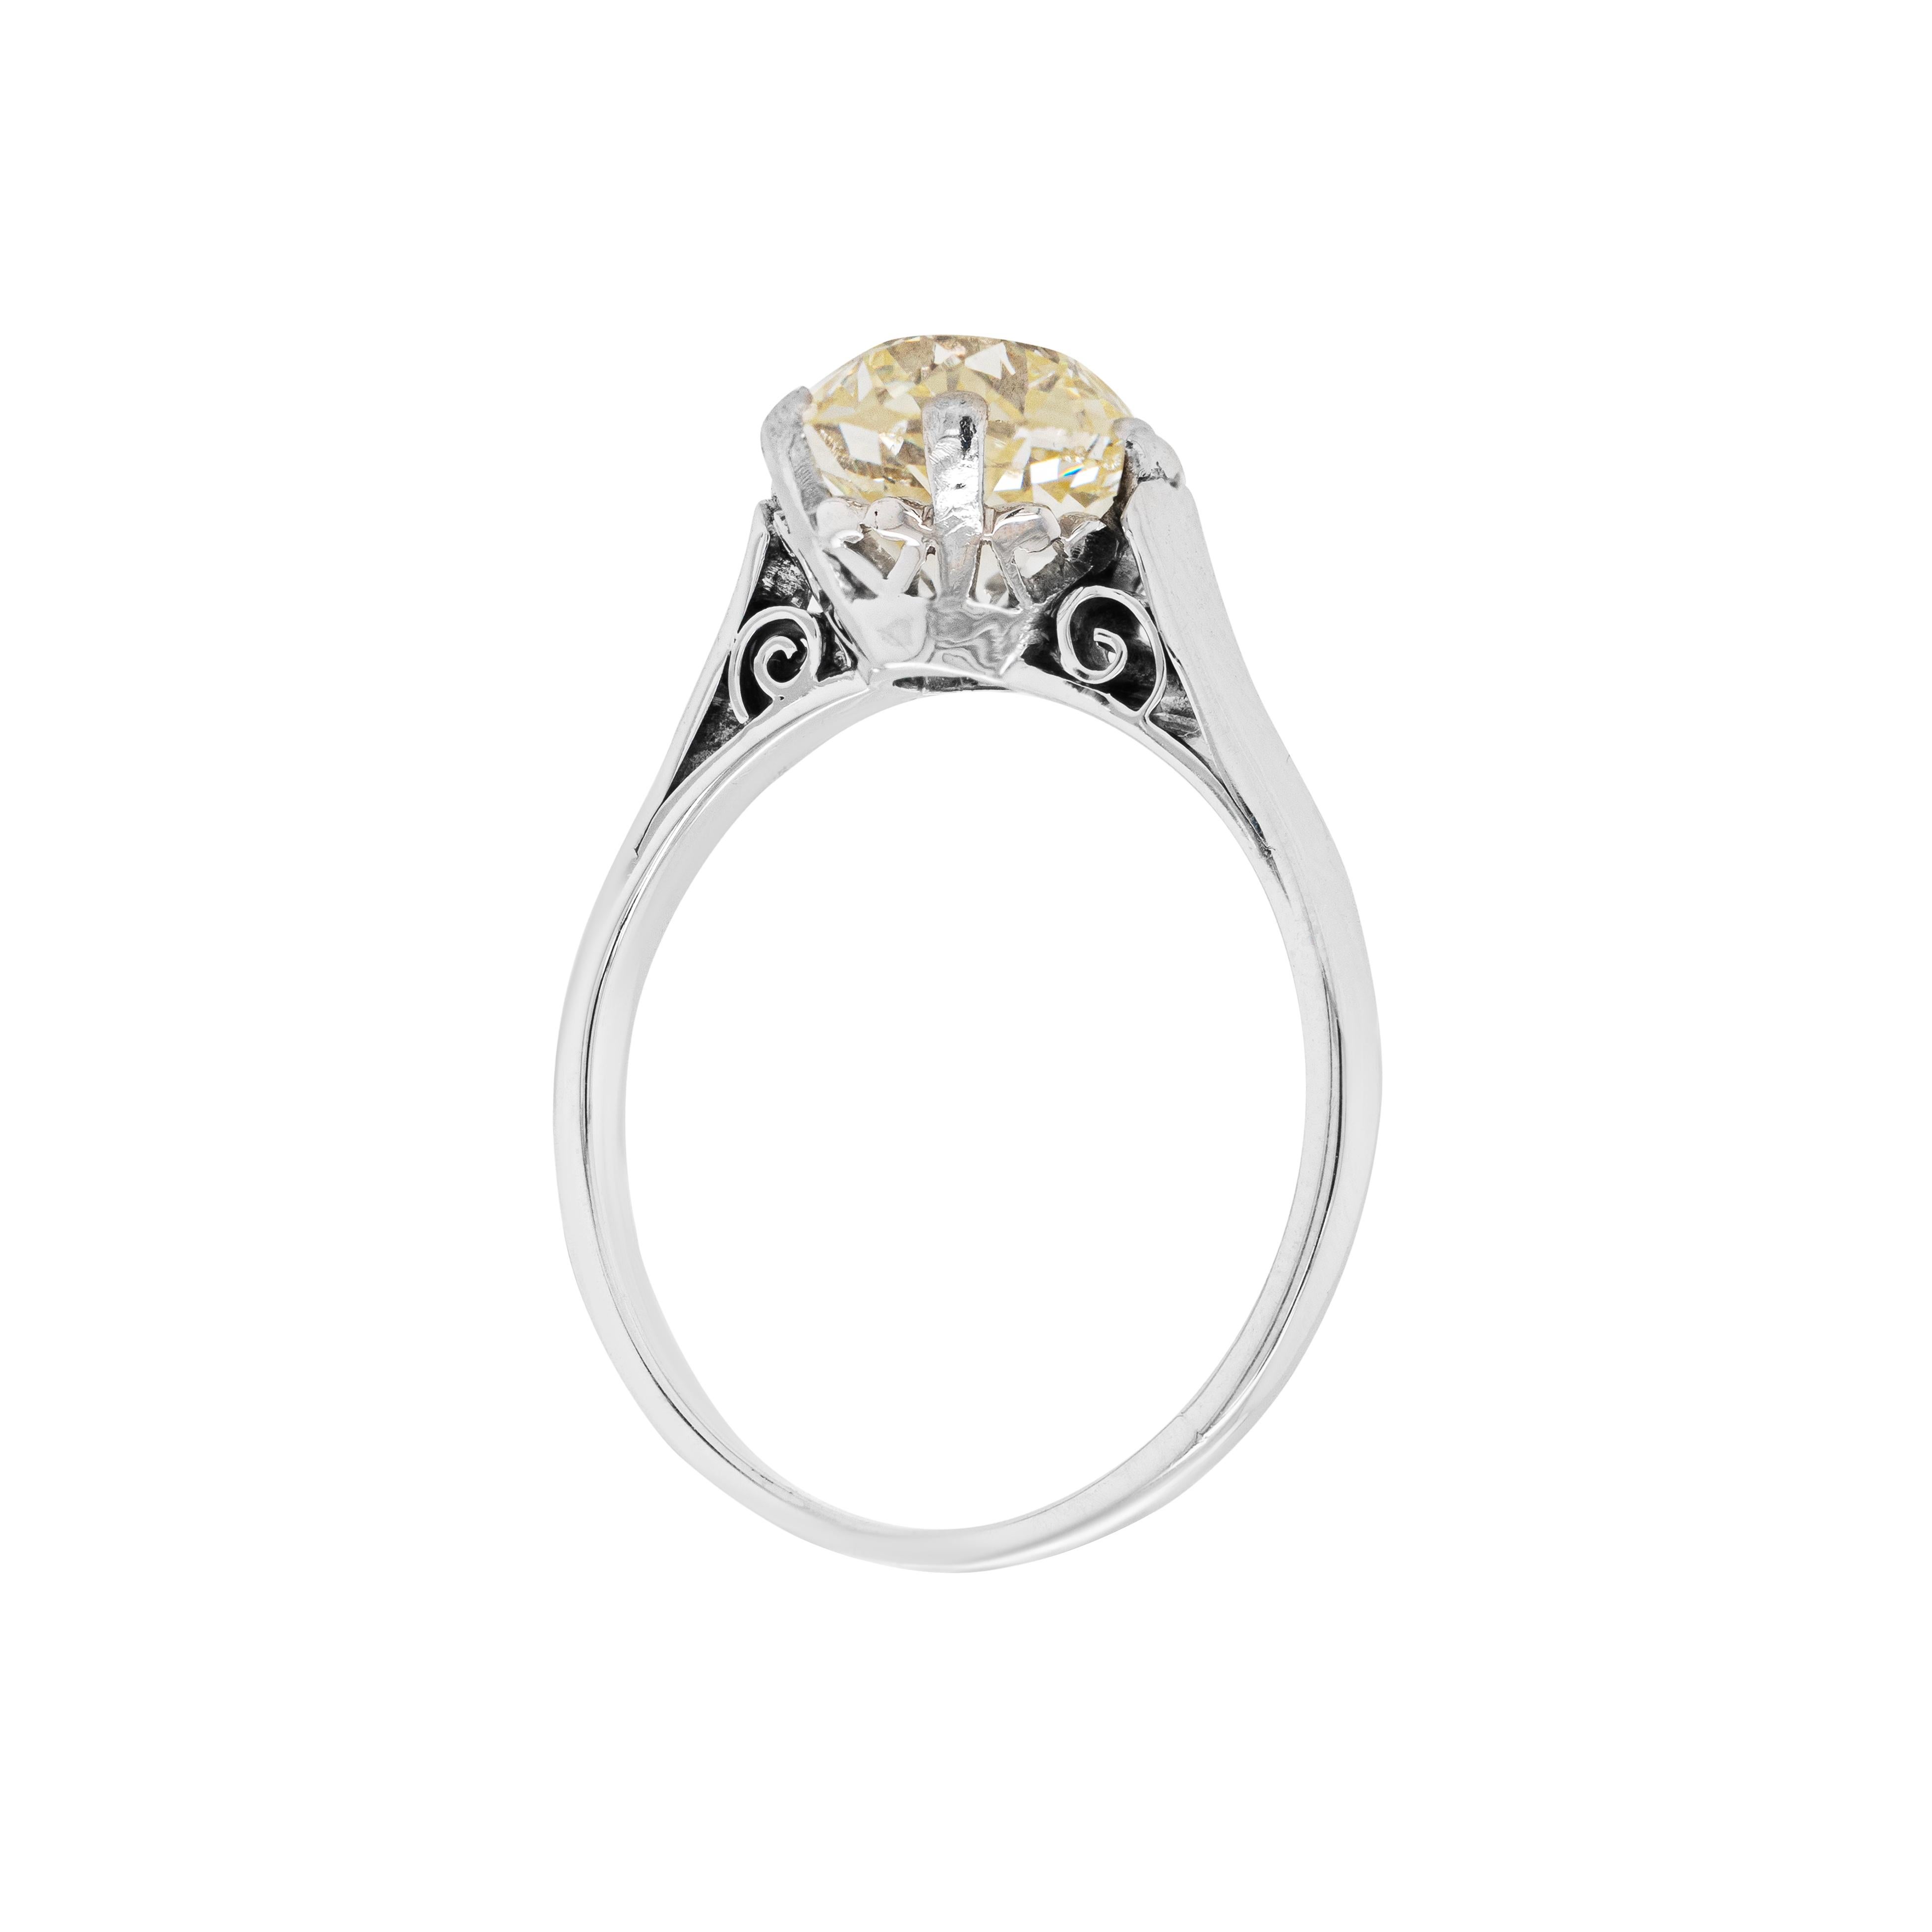 This spectacular antique solitaire engagement ring features a beautiful 2.40ct Victorian old mine cut diamond neatly set at its centre in a six claw, open back platinum collet. Delicate swirls add romantic accents to the sides of the shoulders and